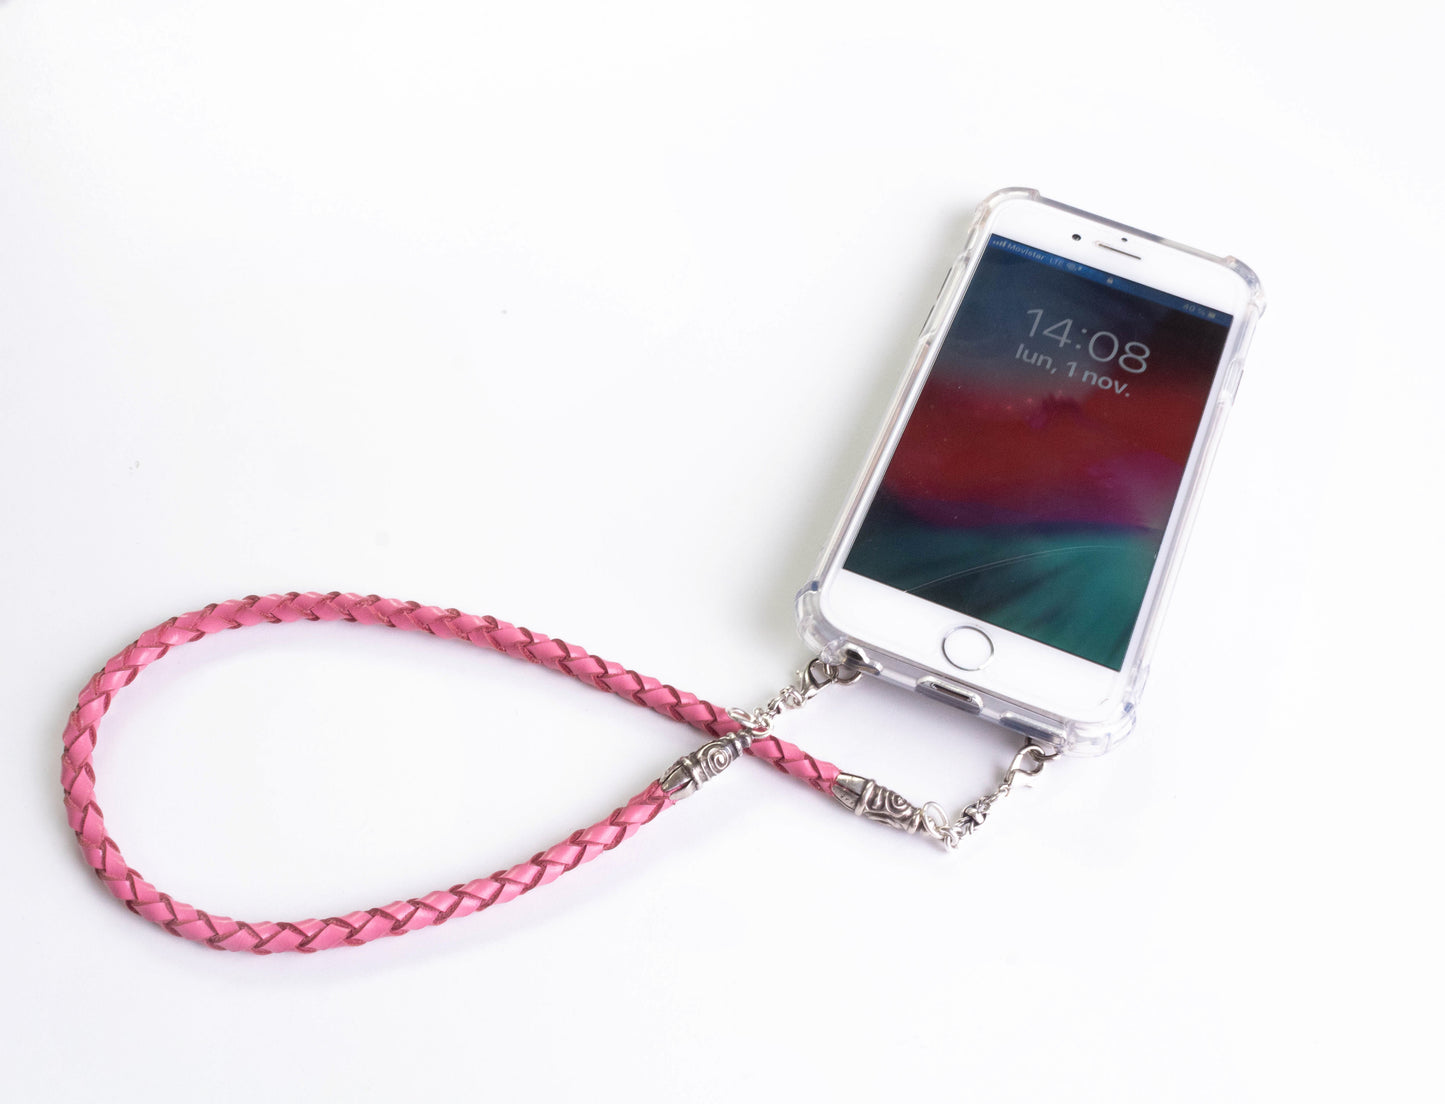 Full-Grain Genuine vegetable-tanned Leather & 925 Sterling Silver Case for iPhone. Pink Genuine Leather Bracelet/Choker/Strap 4 strands hand-braided.- F22